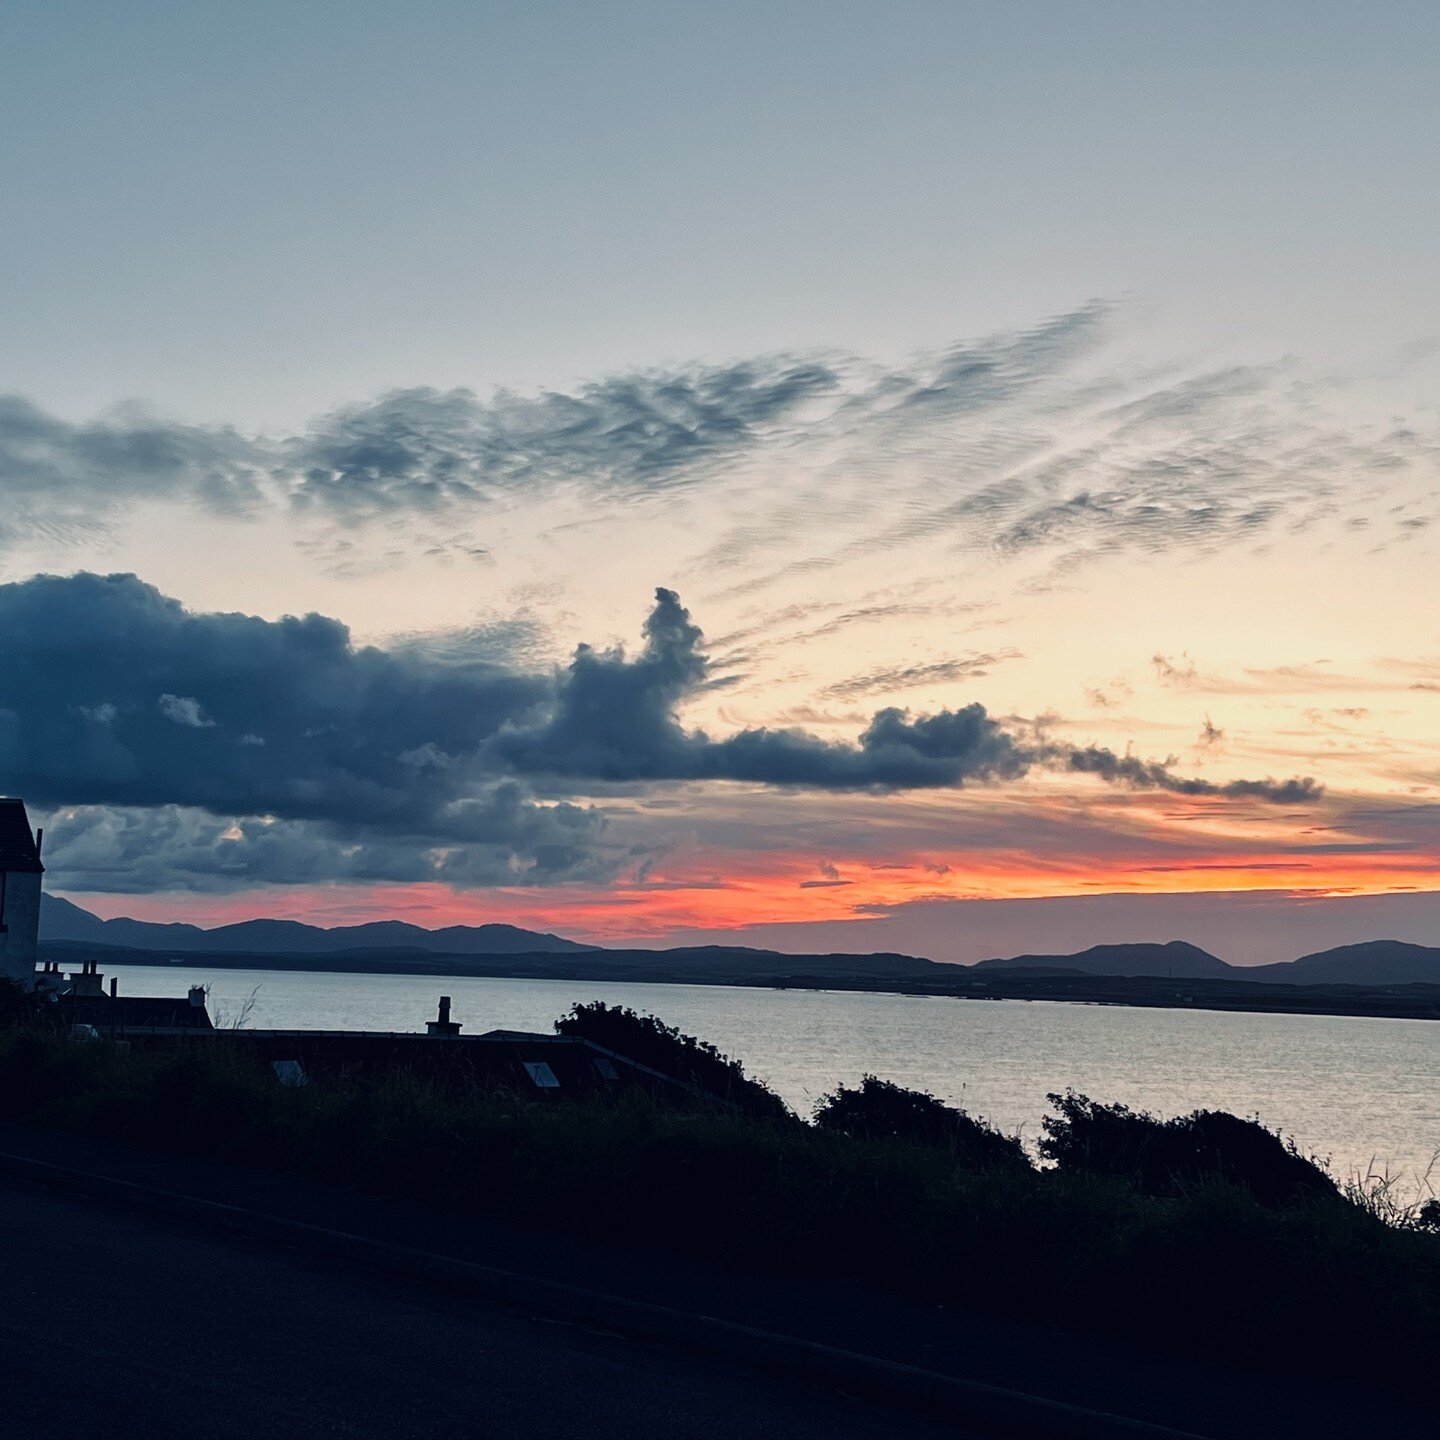 Watching the sun rise and set the sky alight over Loch Indaal was one of the glories of being back on Islay. ⁣
⁣
Returning to the gentle Cotswolds has been hard. ⁣
⁣
But today as the Autumn Equinox graces us, I take solace in the darkening days, the 